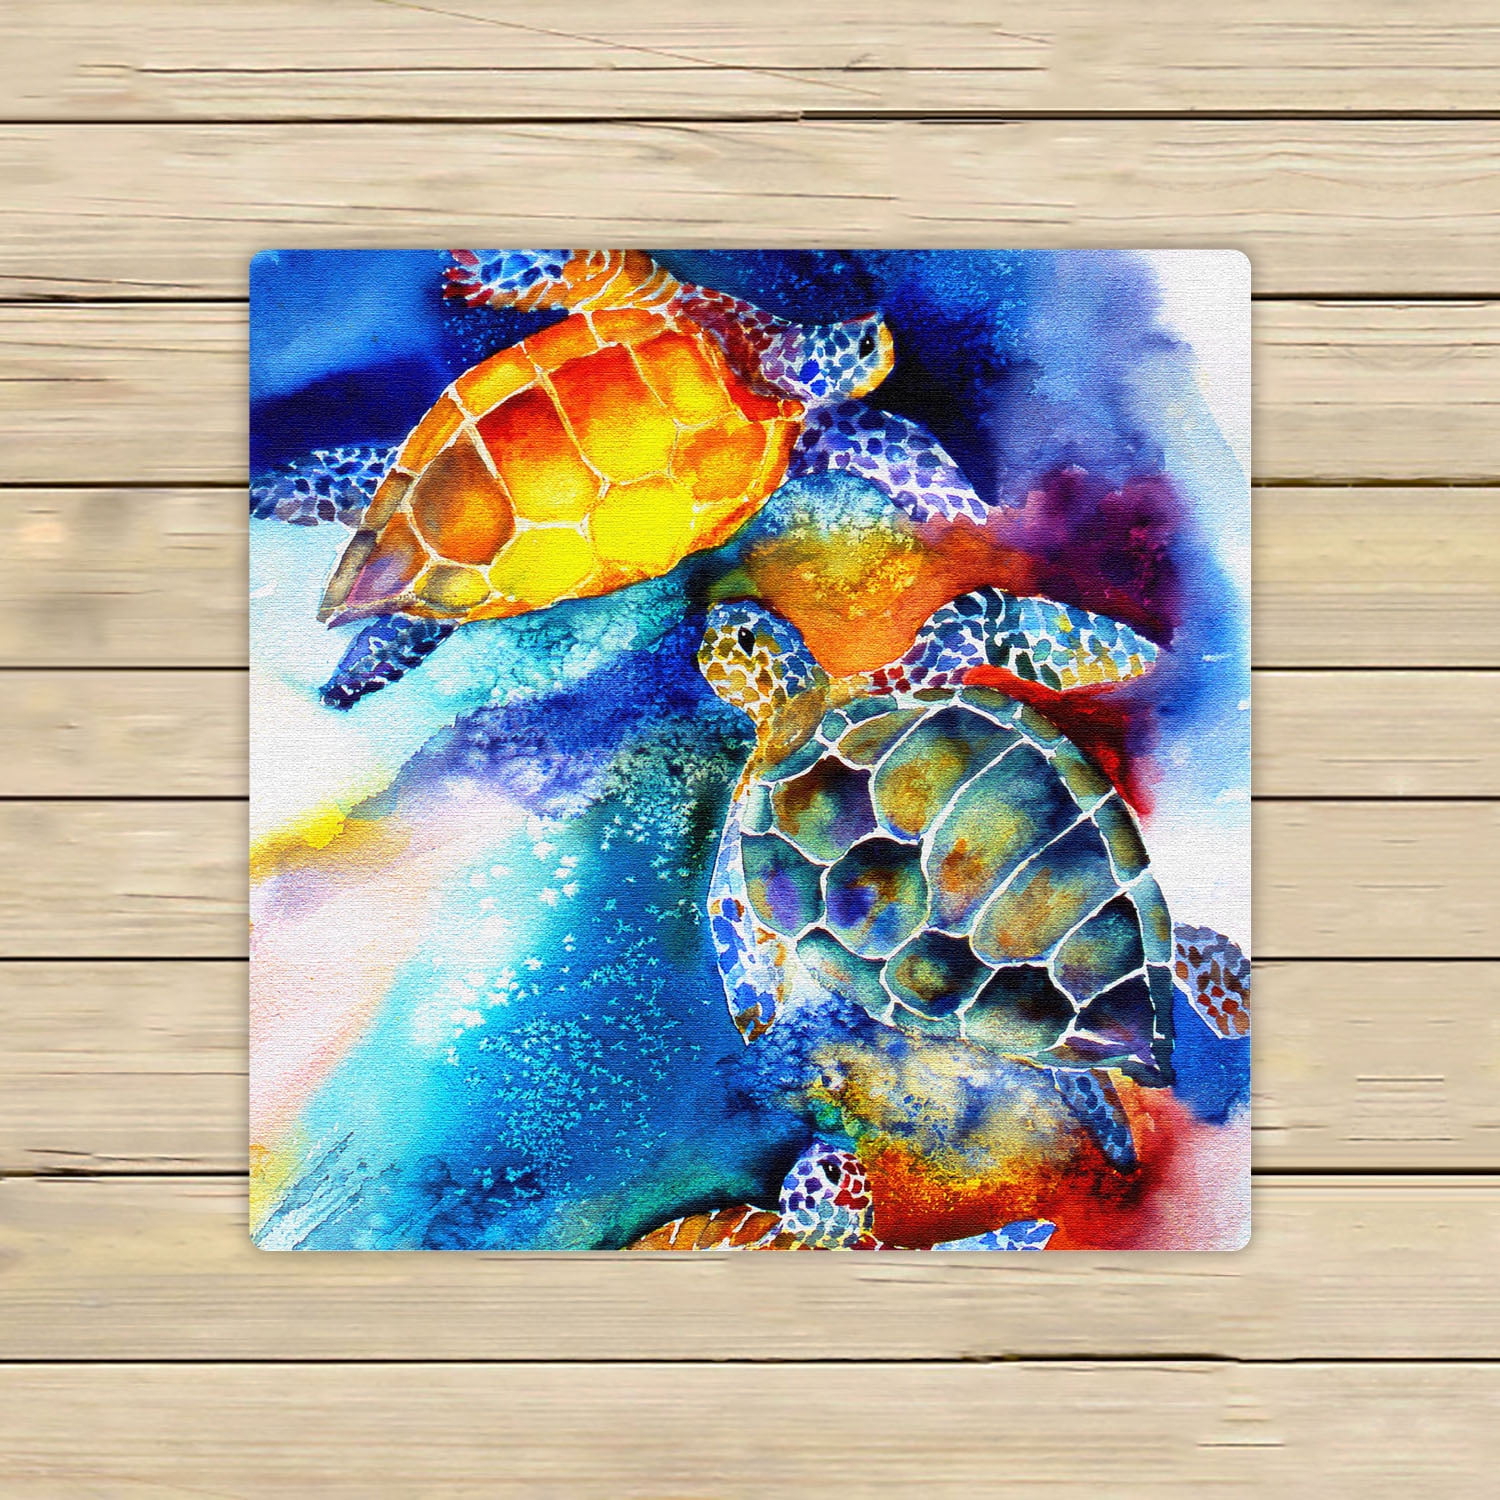 YKCG Watercolor Underwater Sea Turtle Ocean Animals Turtoise Hand Towel  Beach Towels Bath Shower Towel Bath Wrap For Home Outdoor Travel Use 13x13  inches 